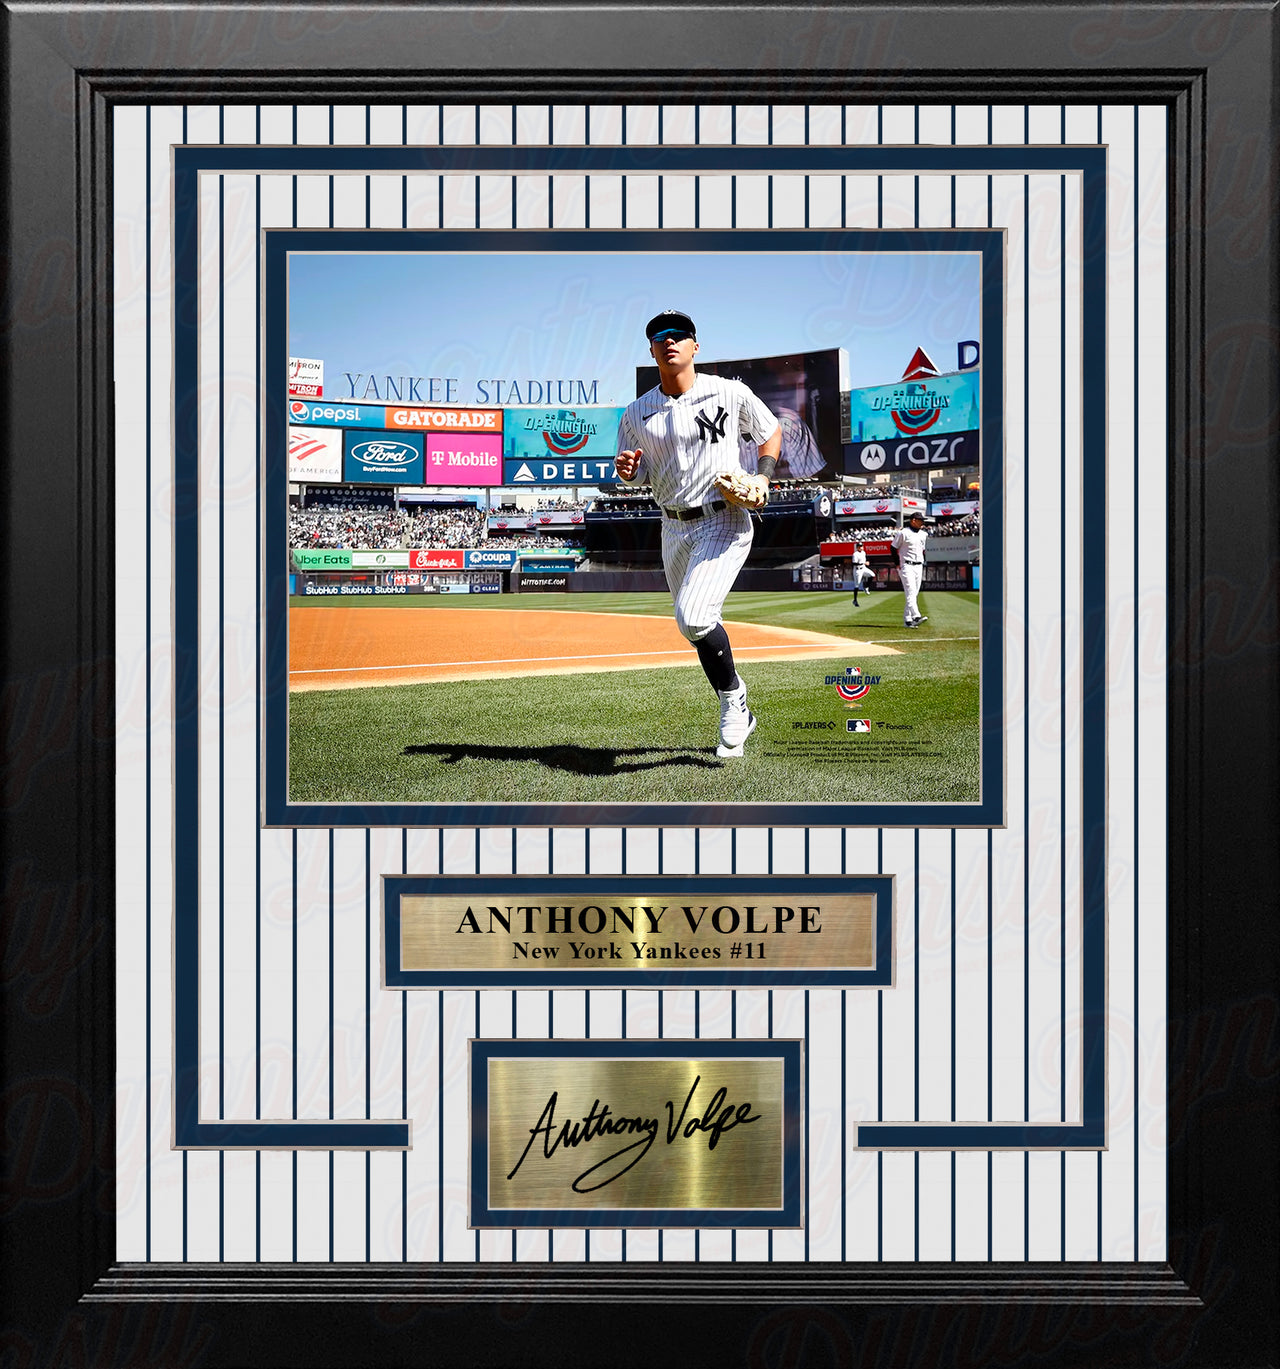 Anthony Volpe Walks Onto the Field New York Yankees 8" x 10" Framed Photo with Engraved Autograph - Dynasty Sports & Framing 